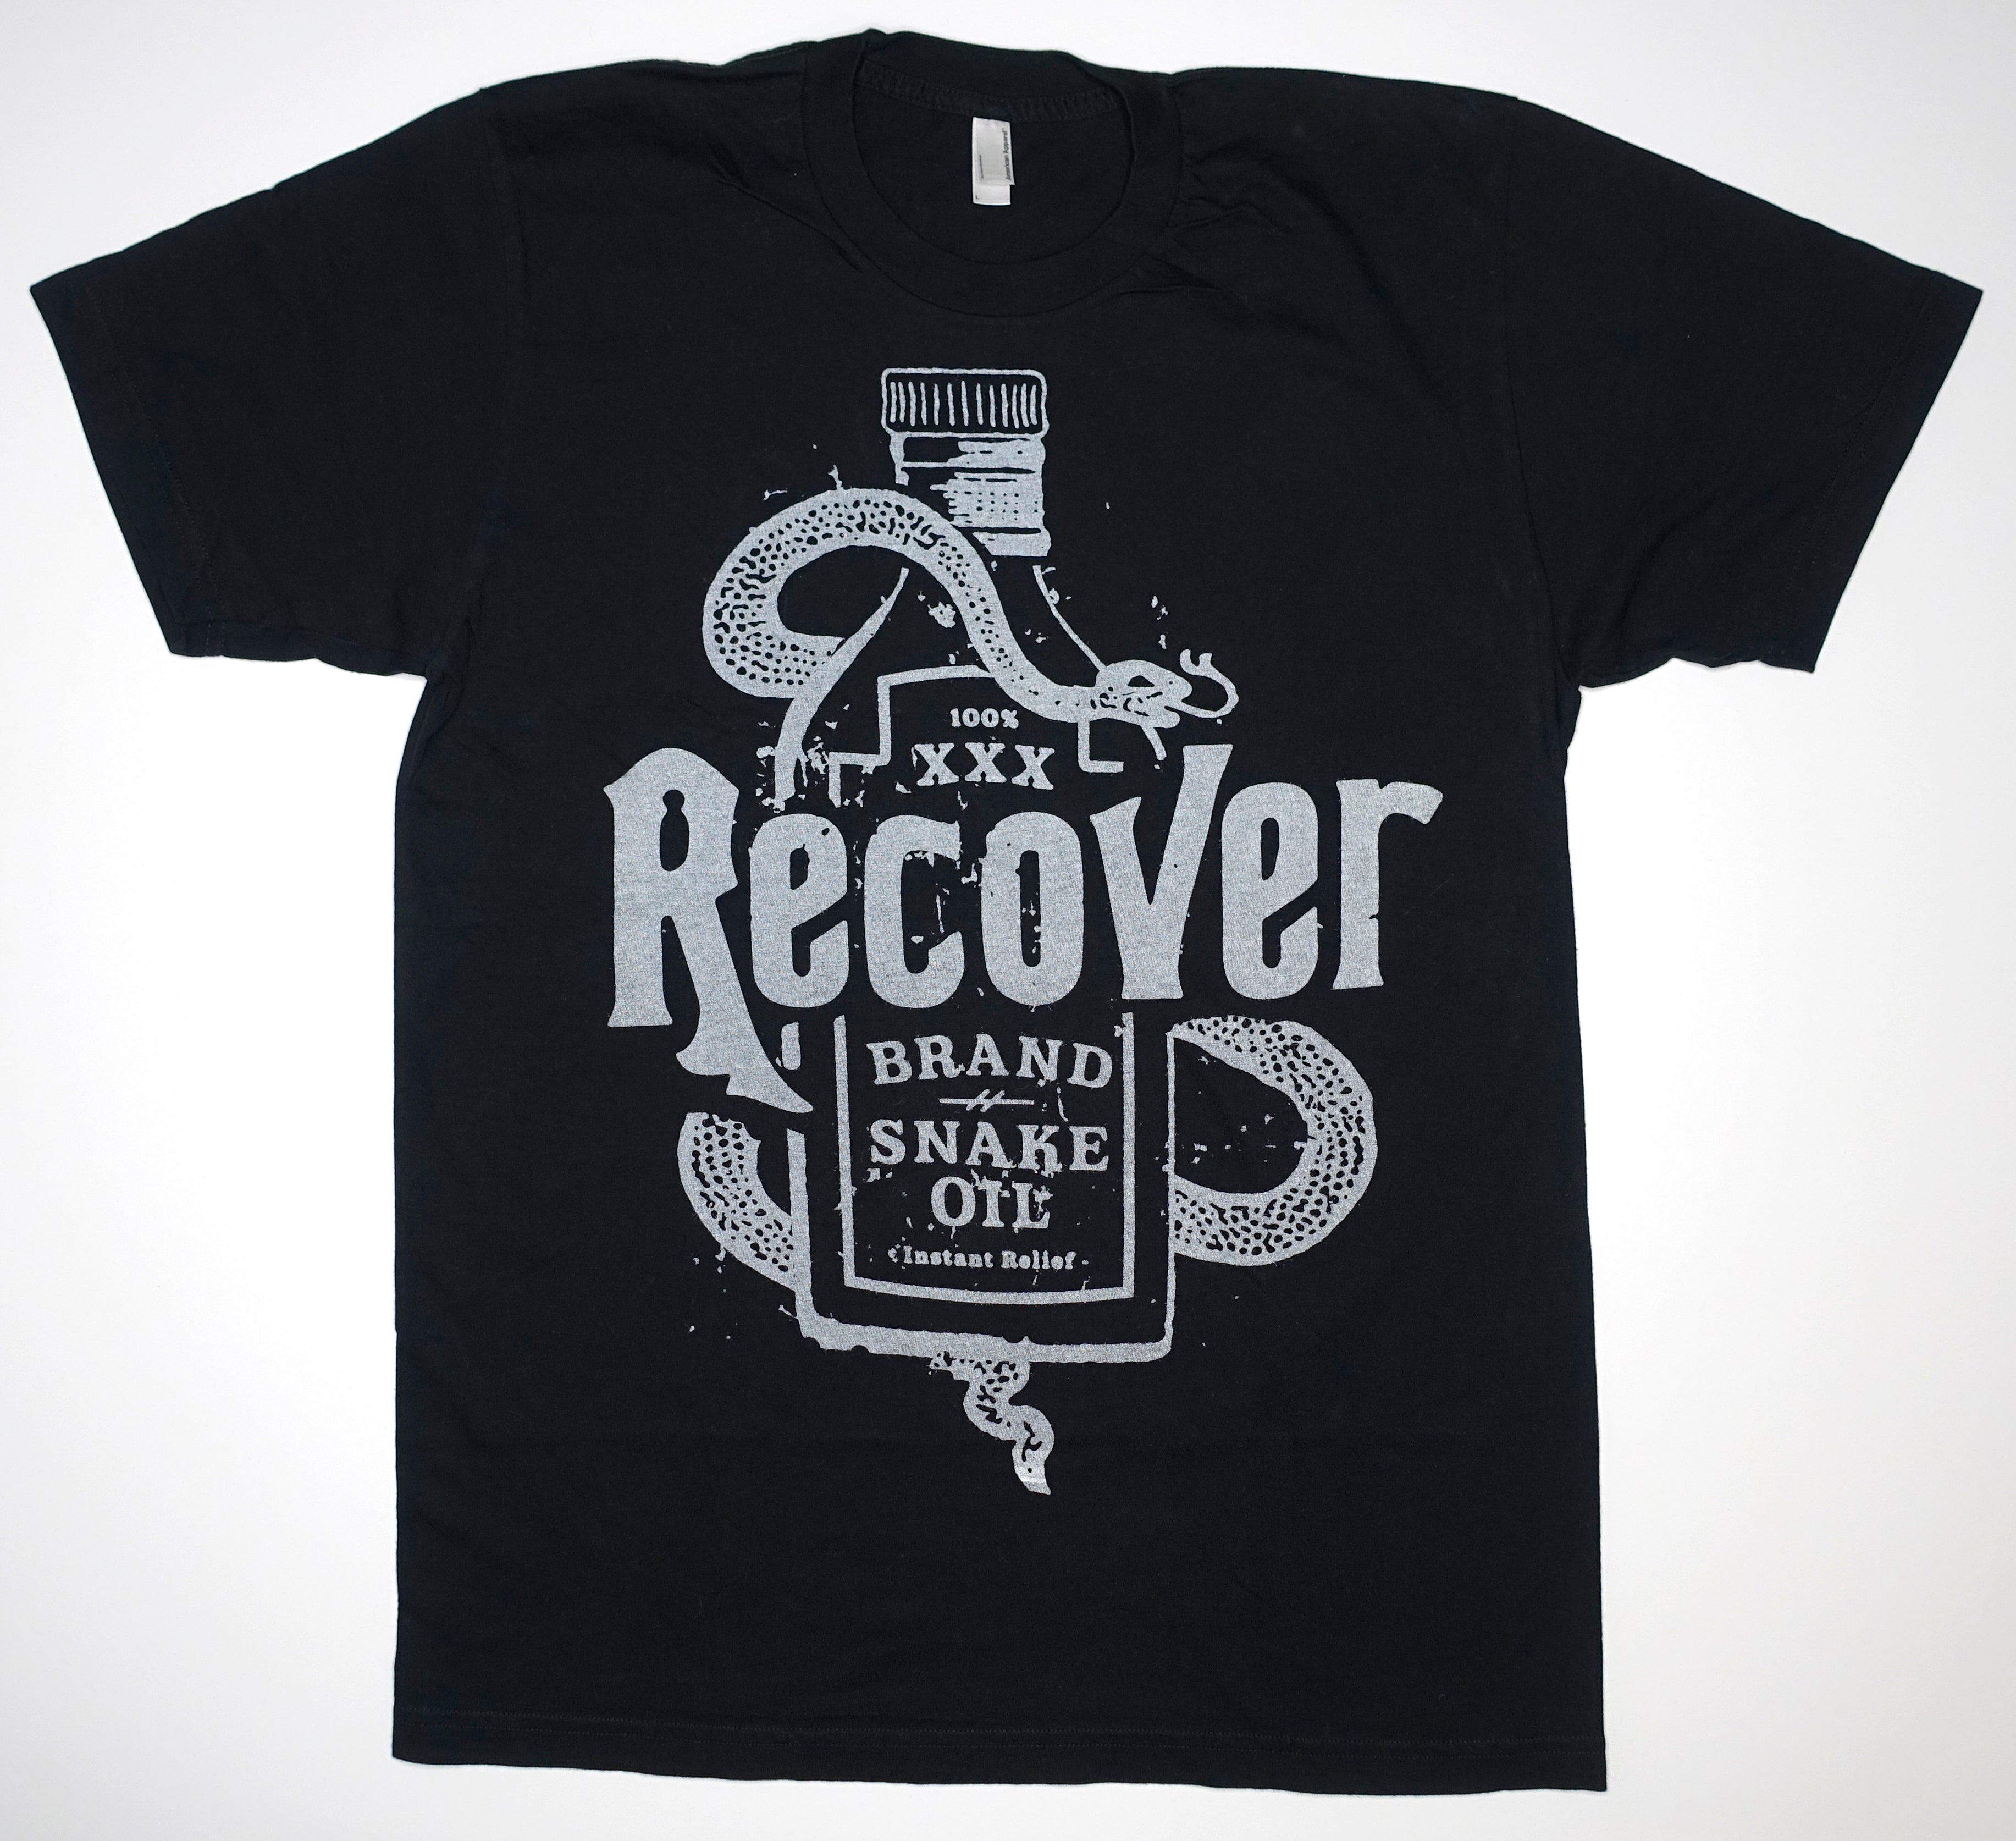 Recover - Snake Oil Tour Shirt Size Large